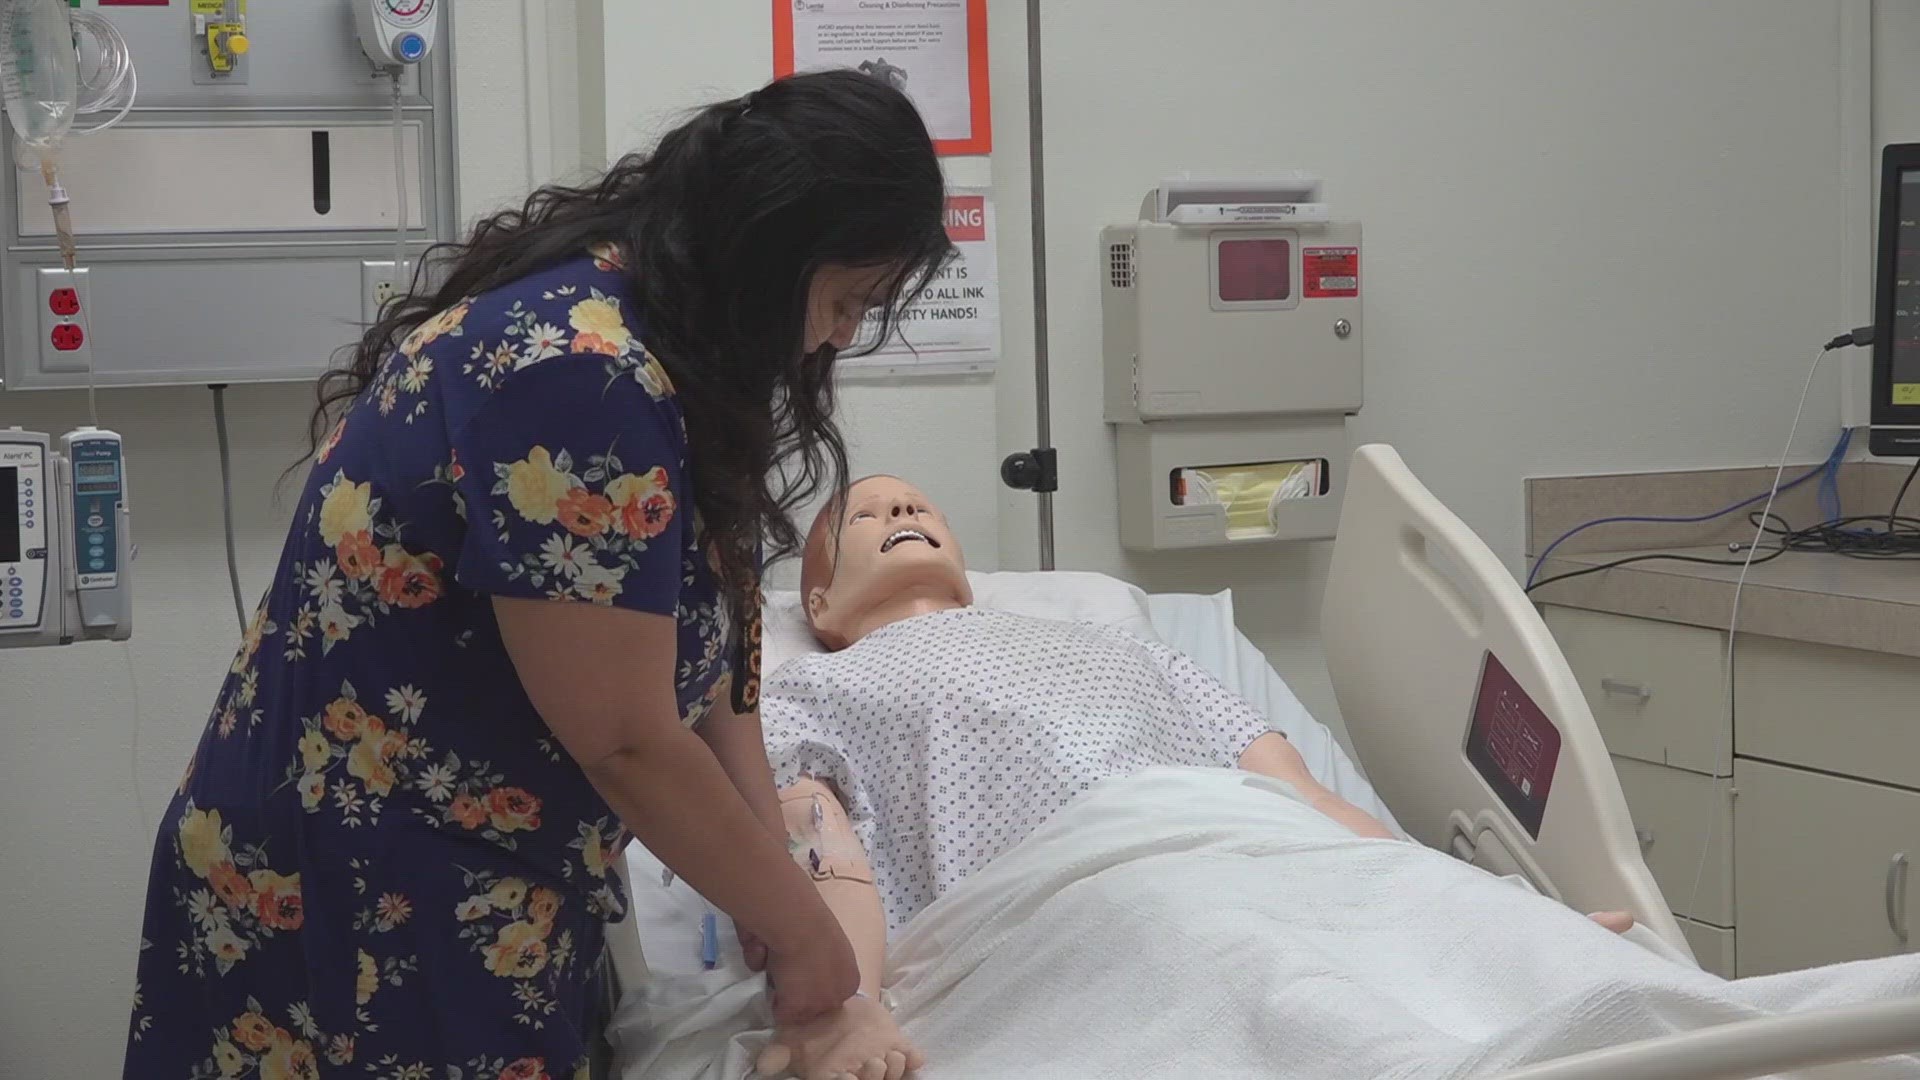 Schools like UTPB and Odessa College have been amplifying their nursing programs due to nationwide nurse shortage.